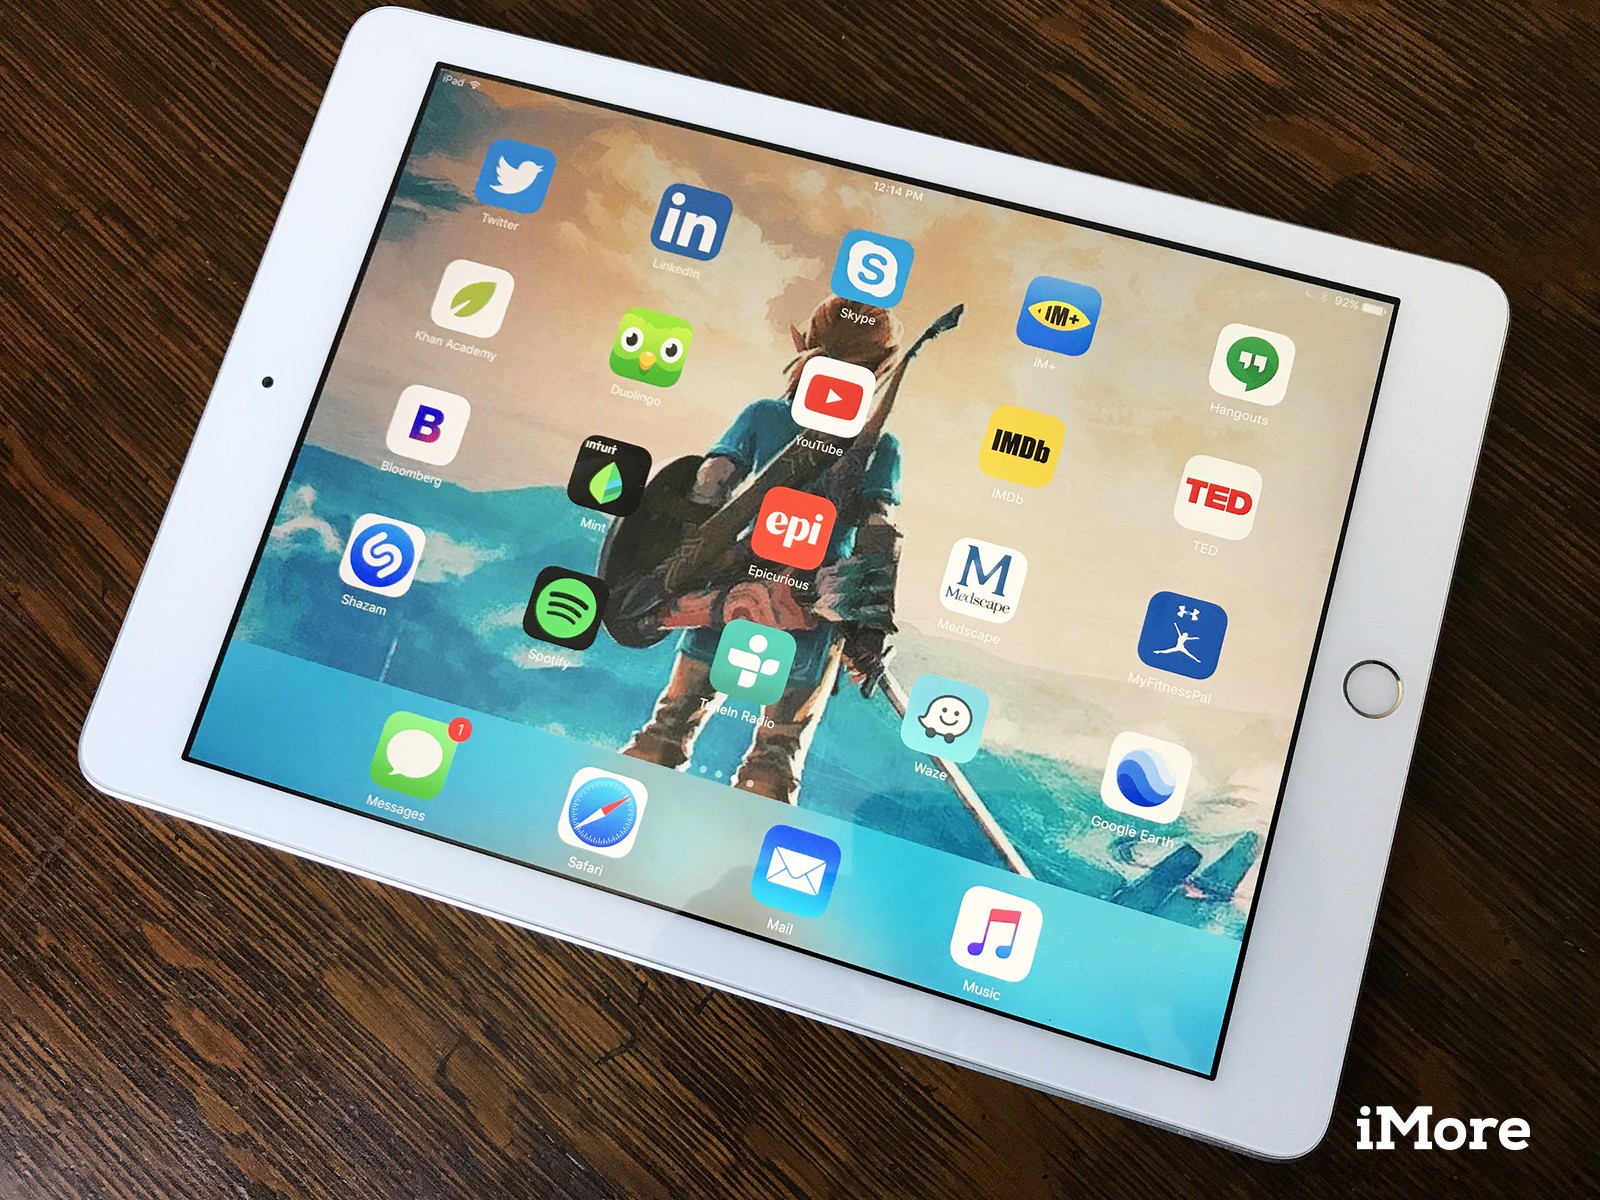 Best Apps For Ipad